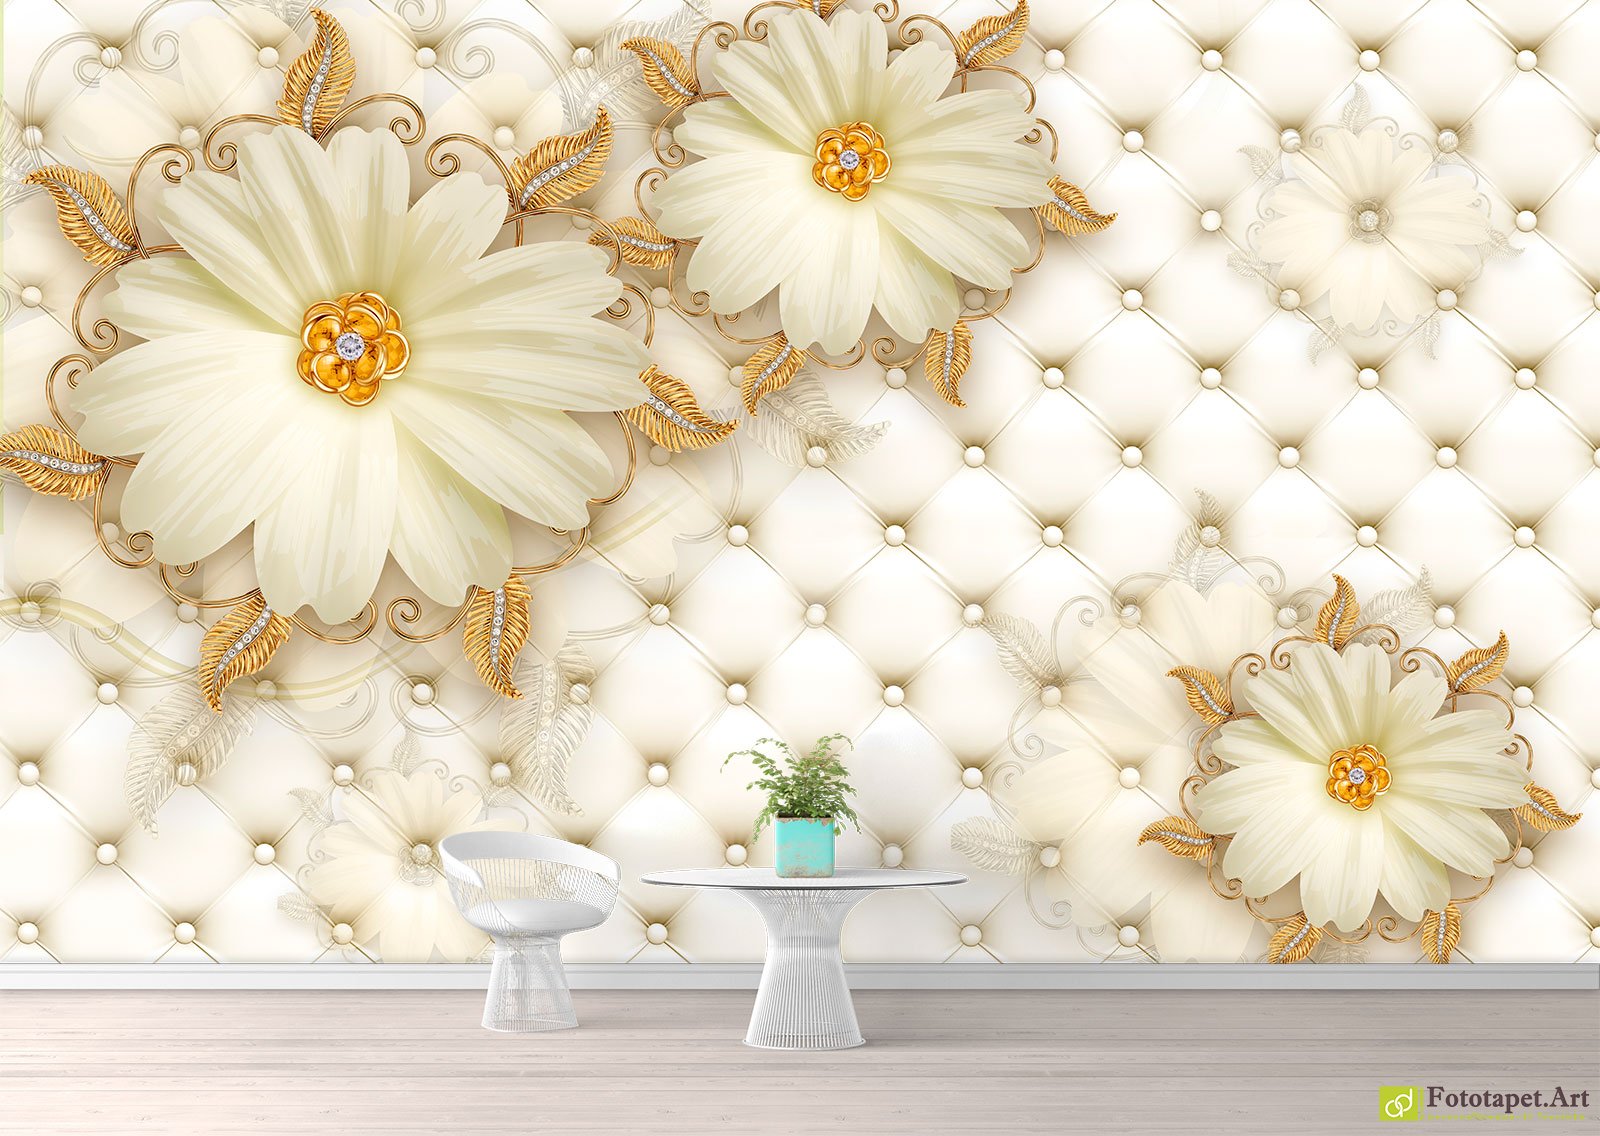 Photo Wallpaper with 3D Effect - Golden daisies on leather background |   Amazing 3D Wall Murals by Online